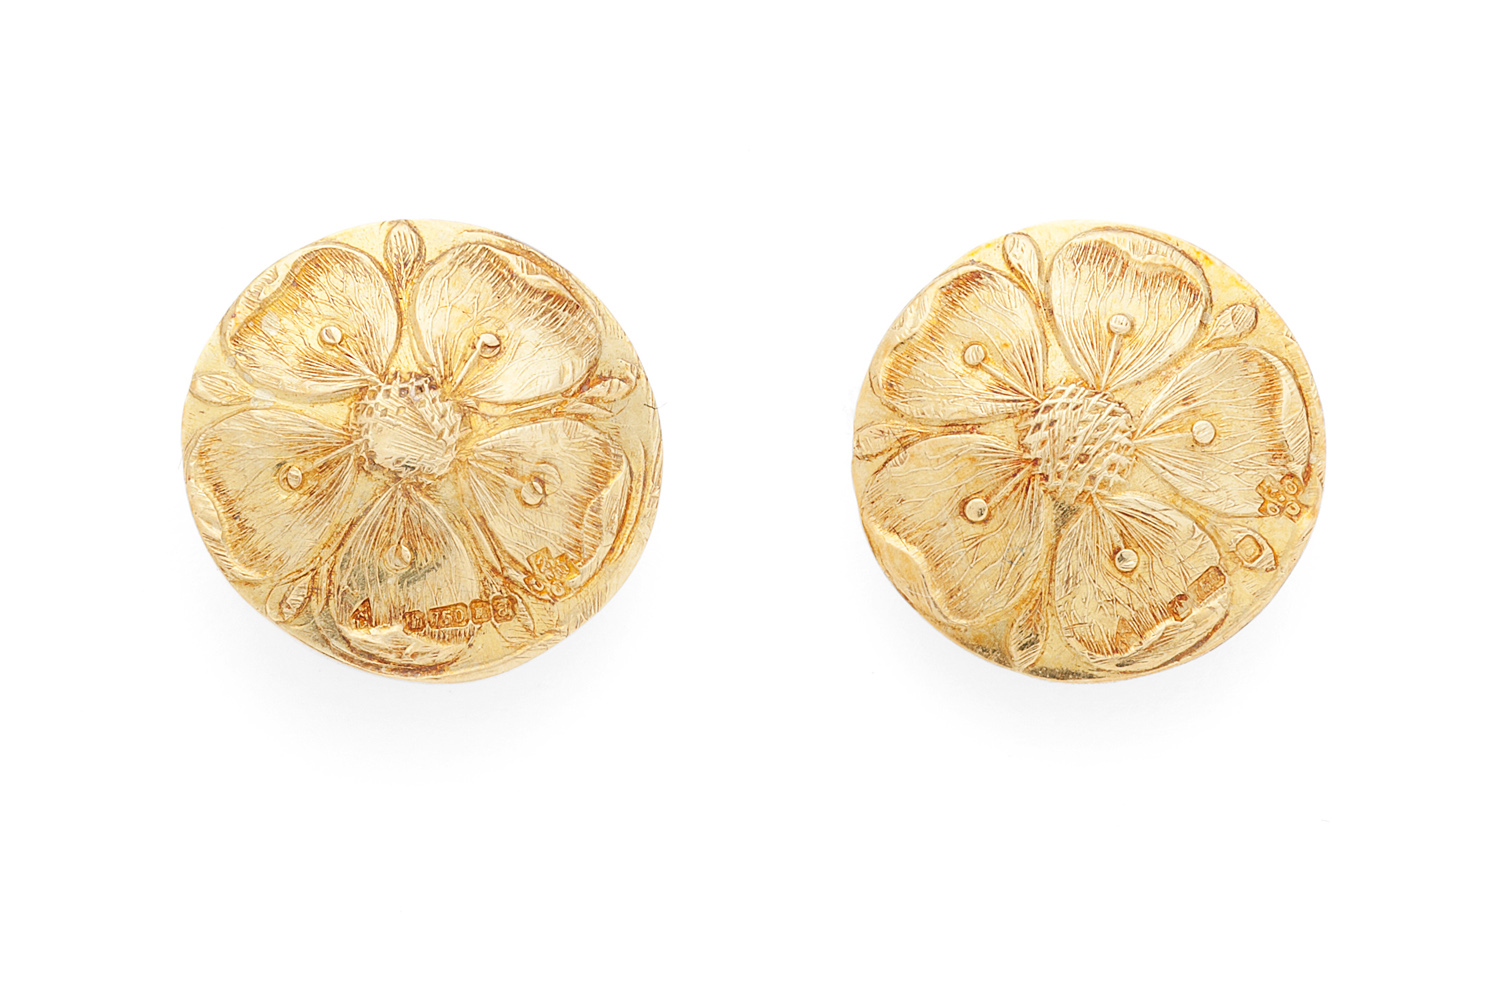 Lot 15 - MALCOLM APPLEBY - A pair of 18ct gold earrings